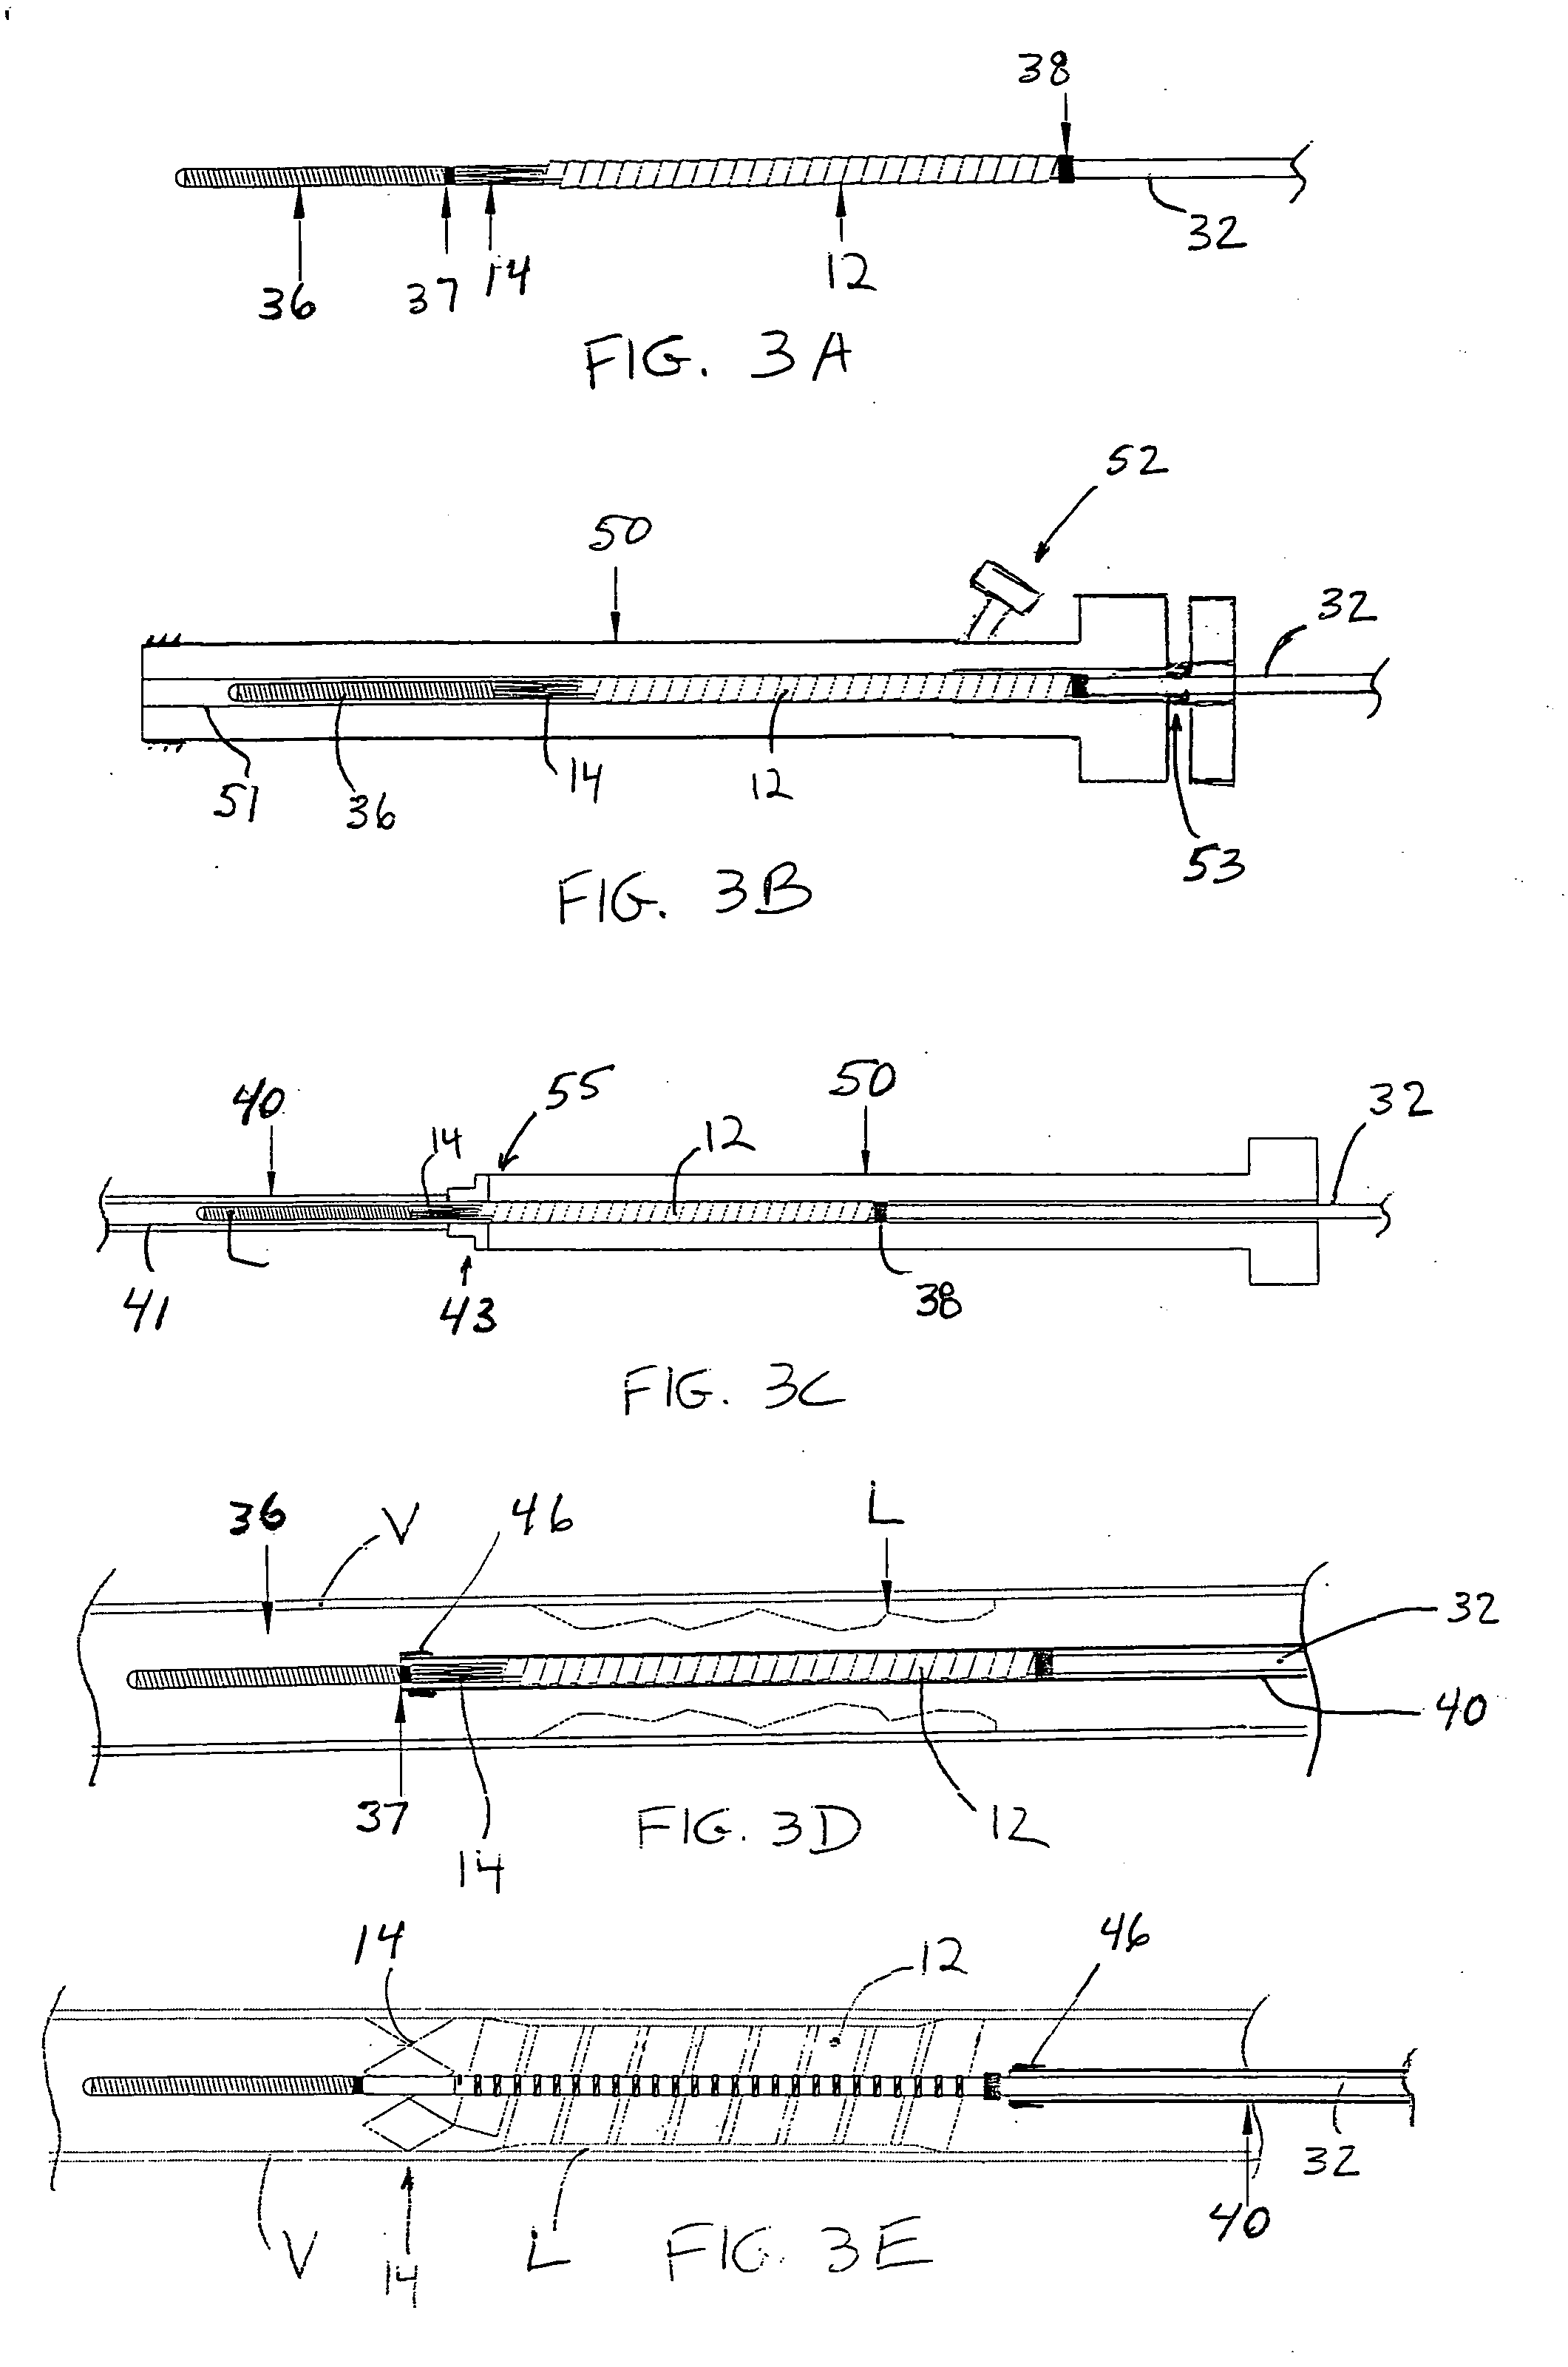 Delivery system for vascular prostheses and methods of use